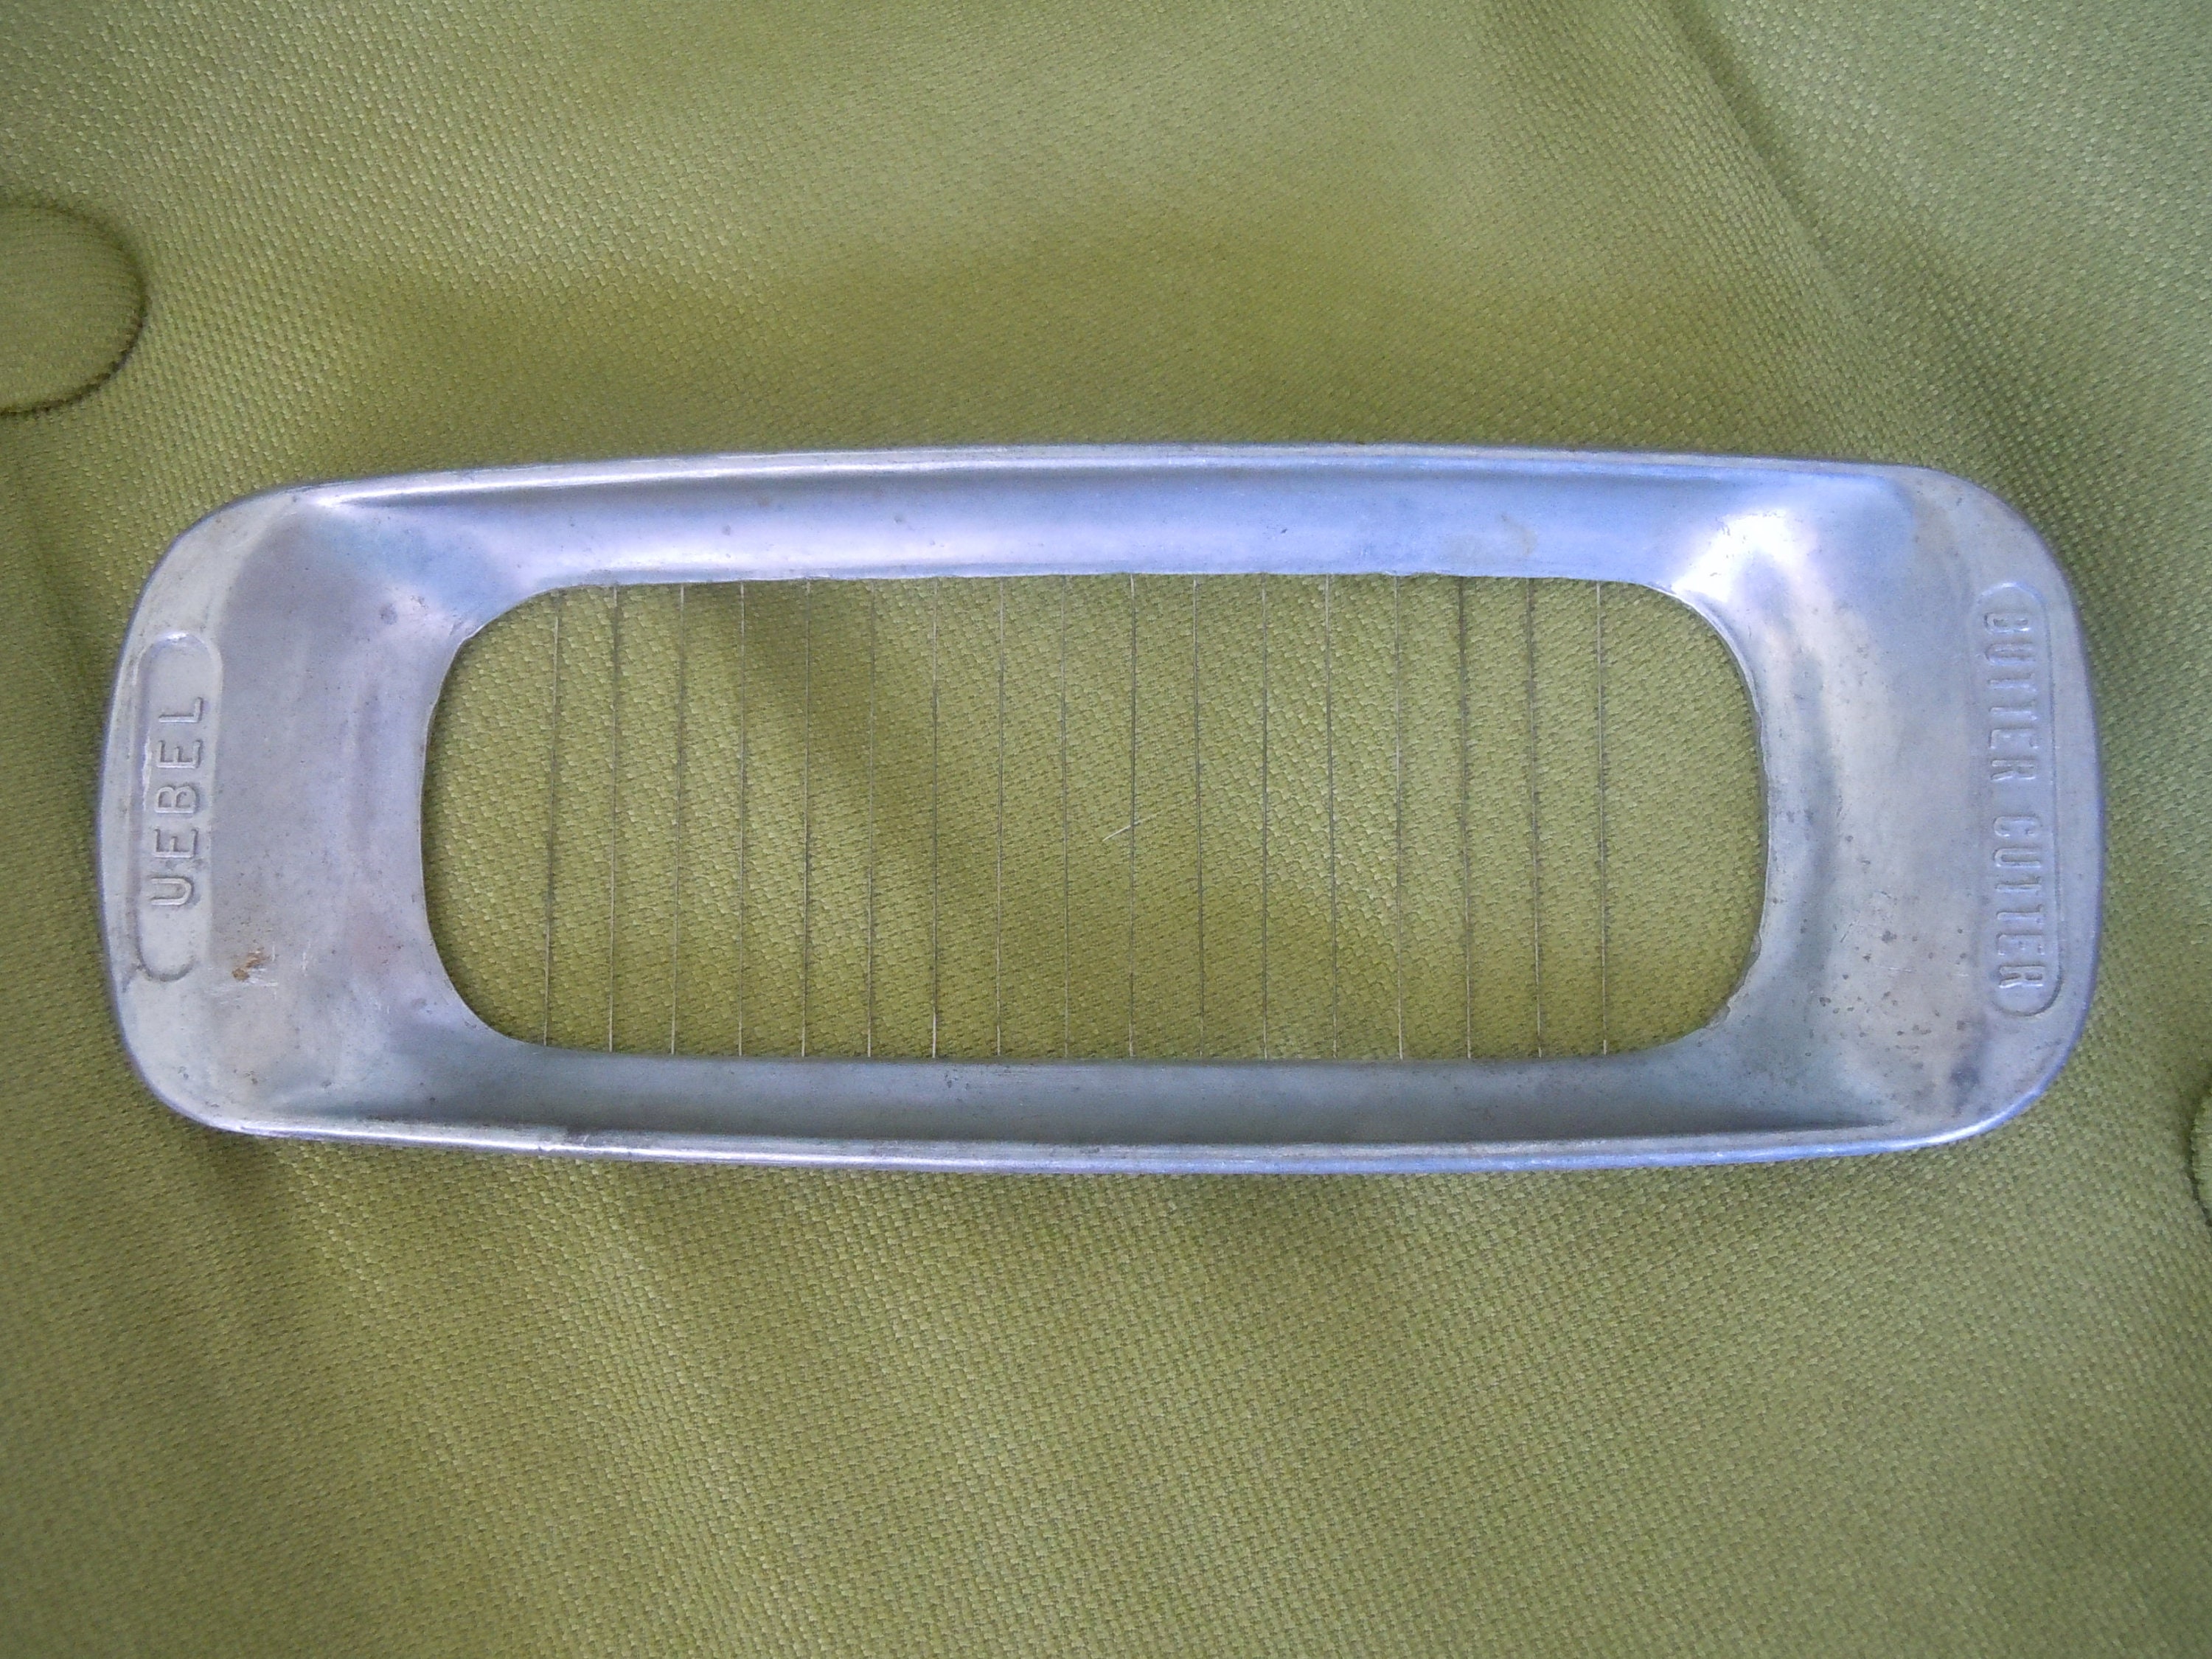 Vintage Butter Slicer / UEBEL Stick Butter Cutter / Crinkle Slicer for  Butter or Cheese / Retro Kitchen Gadgets / Country Kitchen Decor 